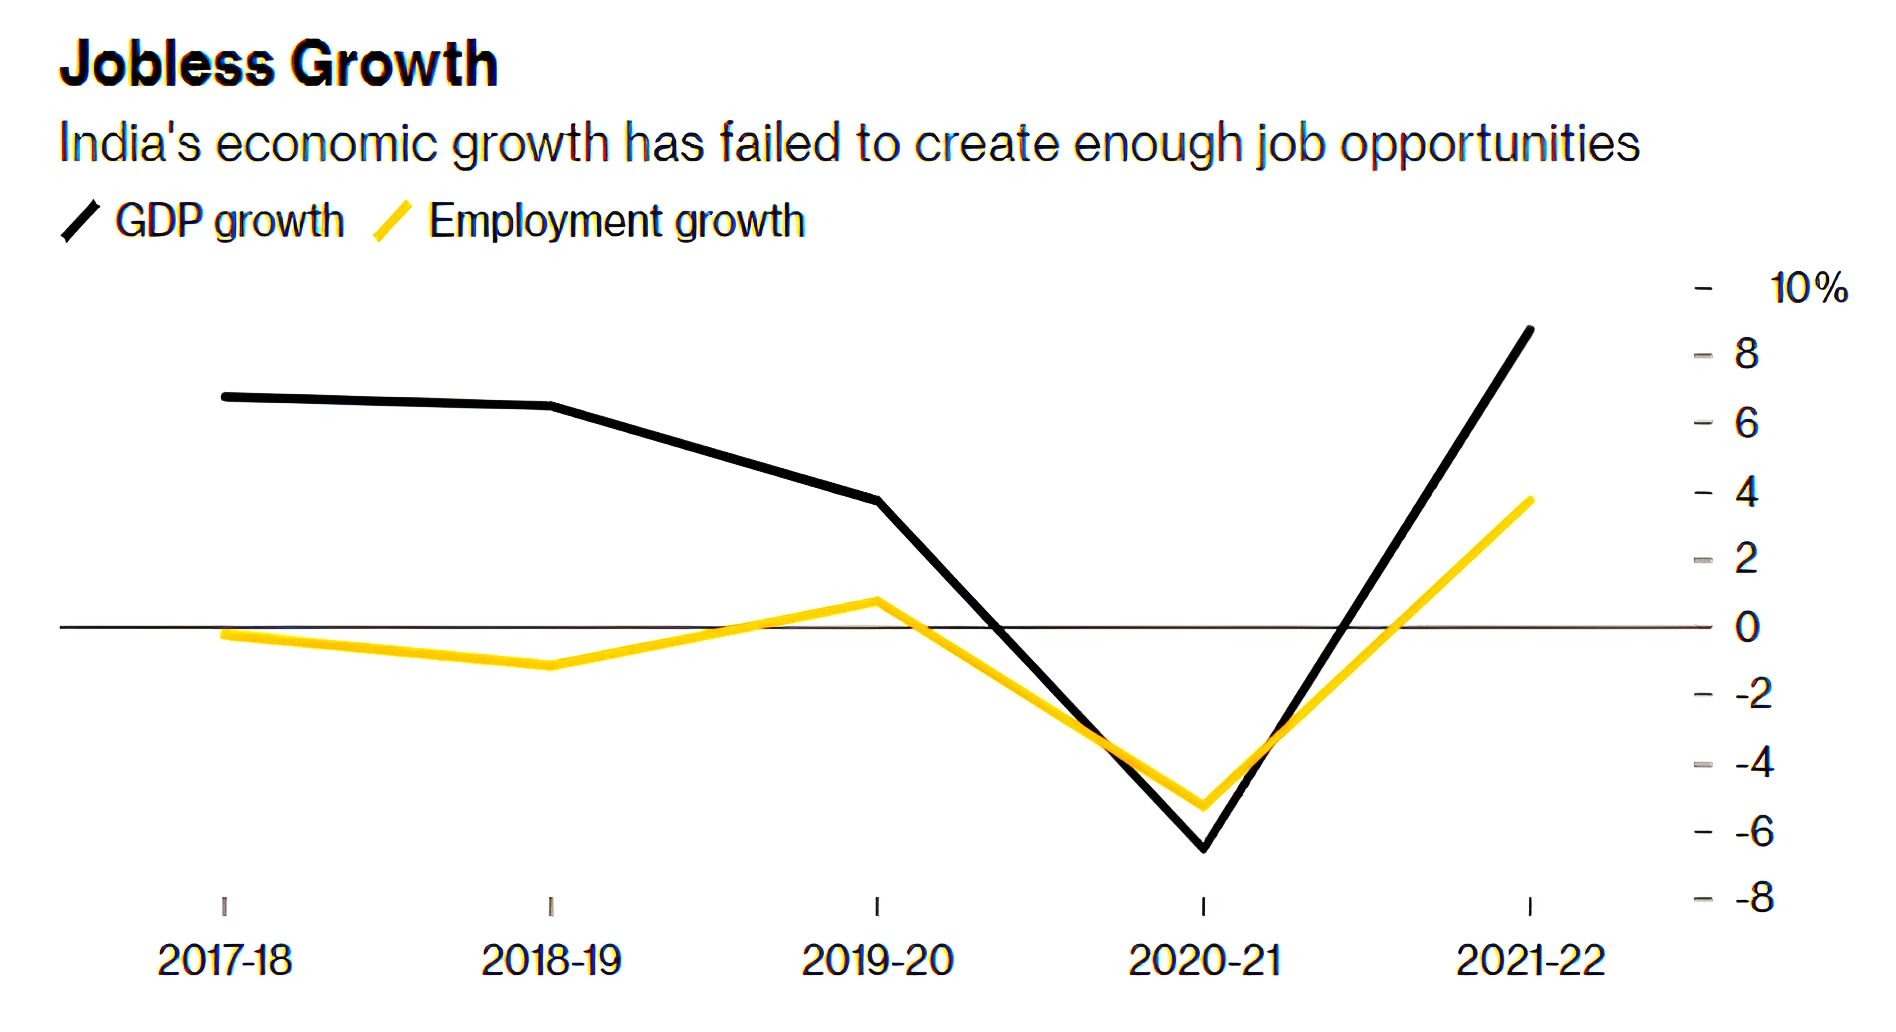 Jobless Growth